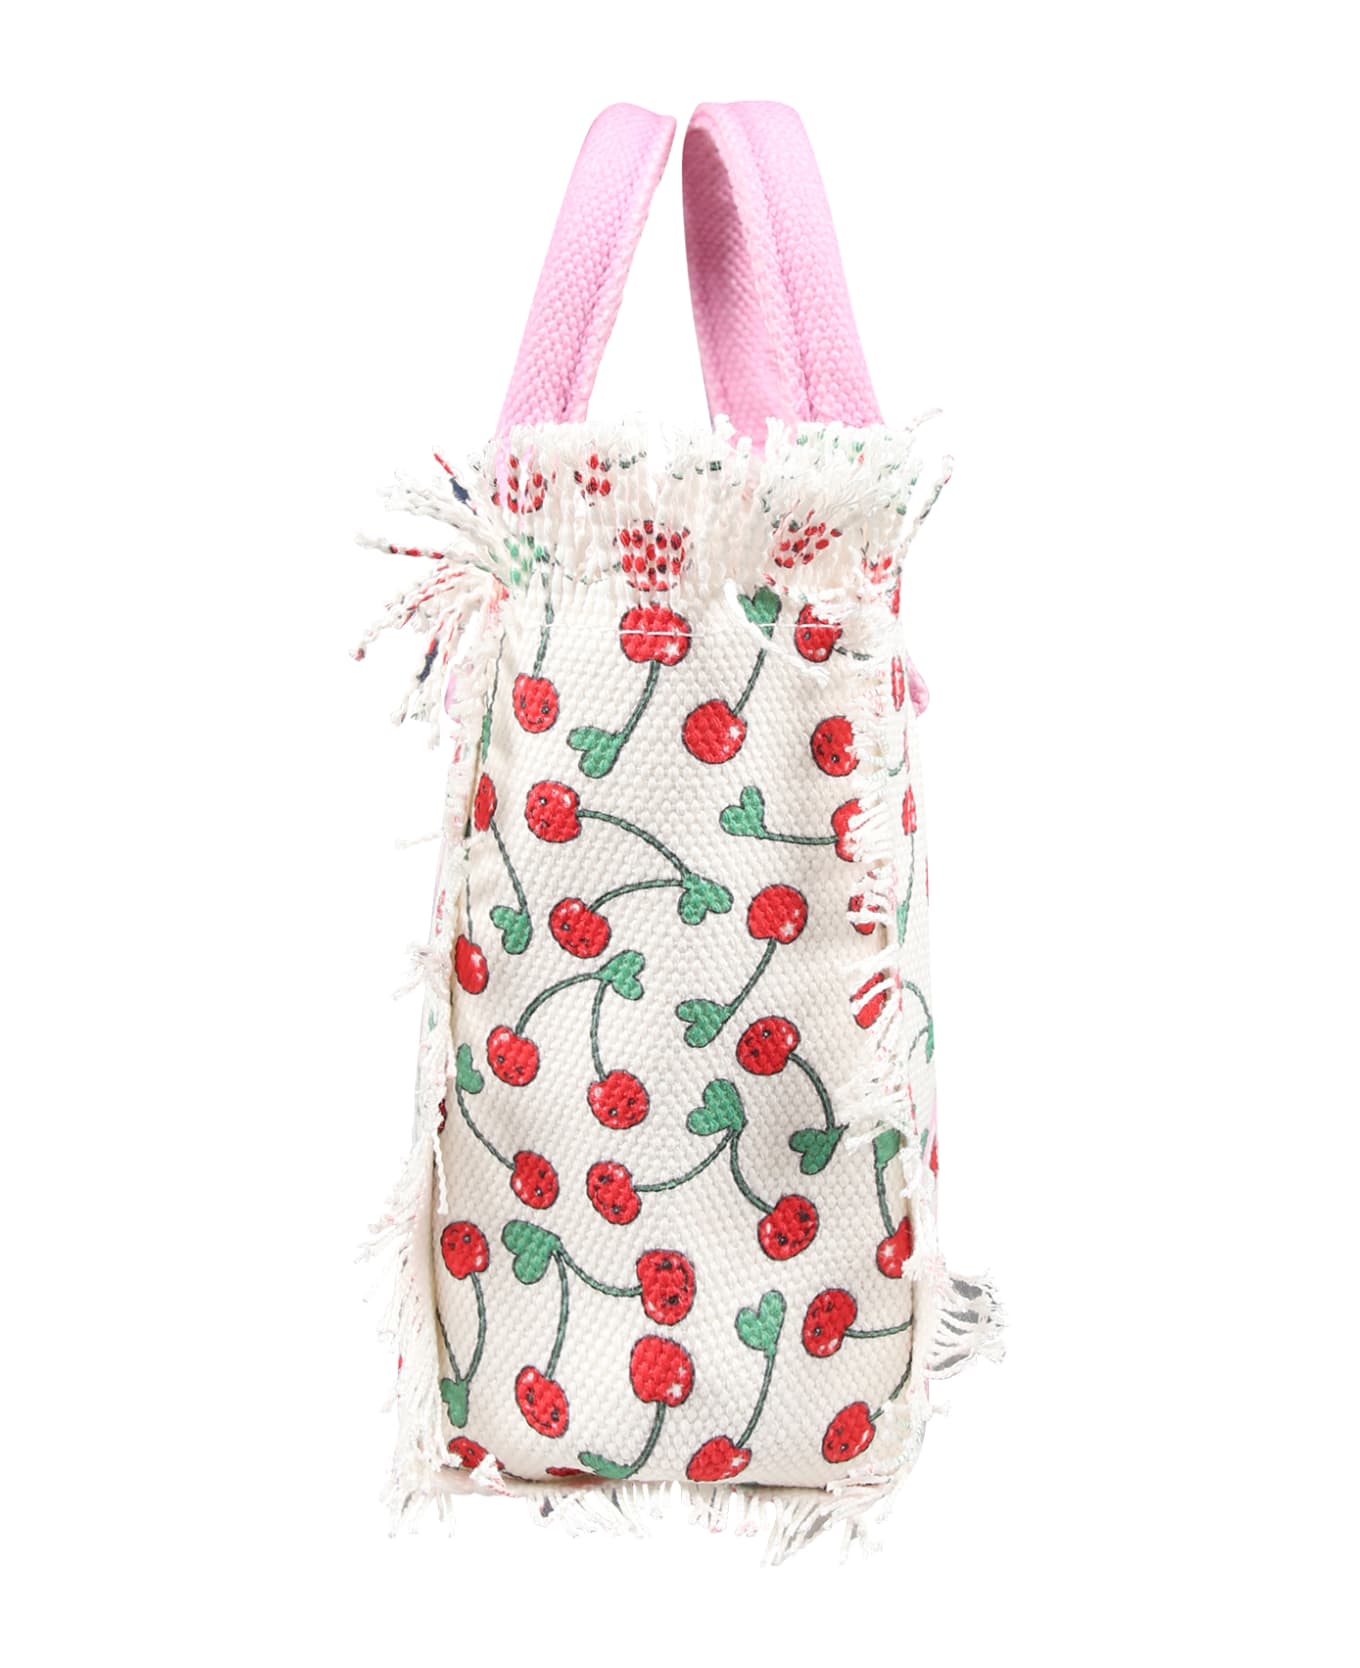 MC2 Saint Barth White Bag For Girl With Cherry Print And Logo - White アクセサリー＆ギフト